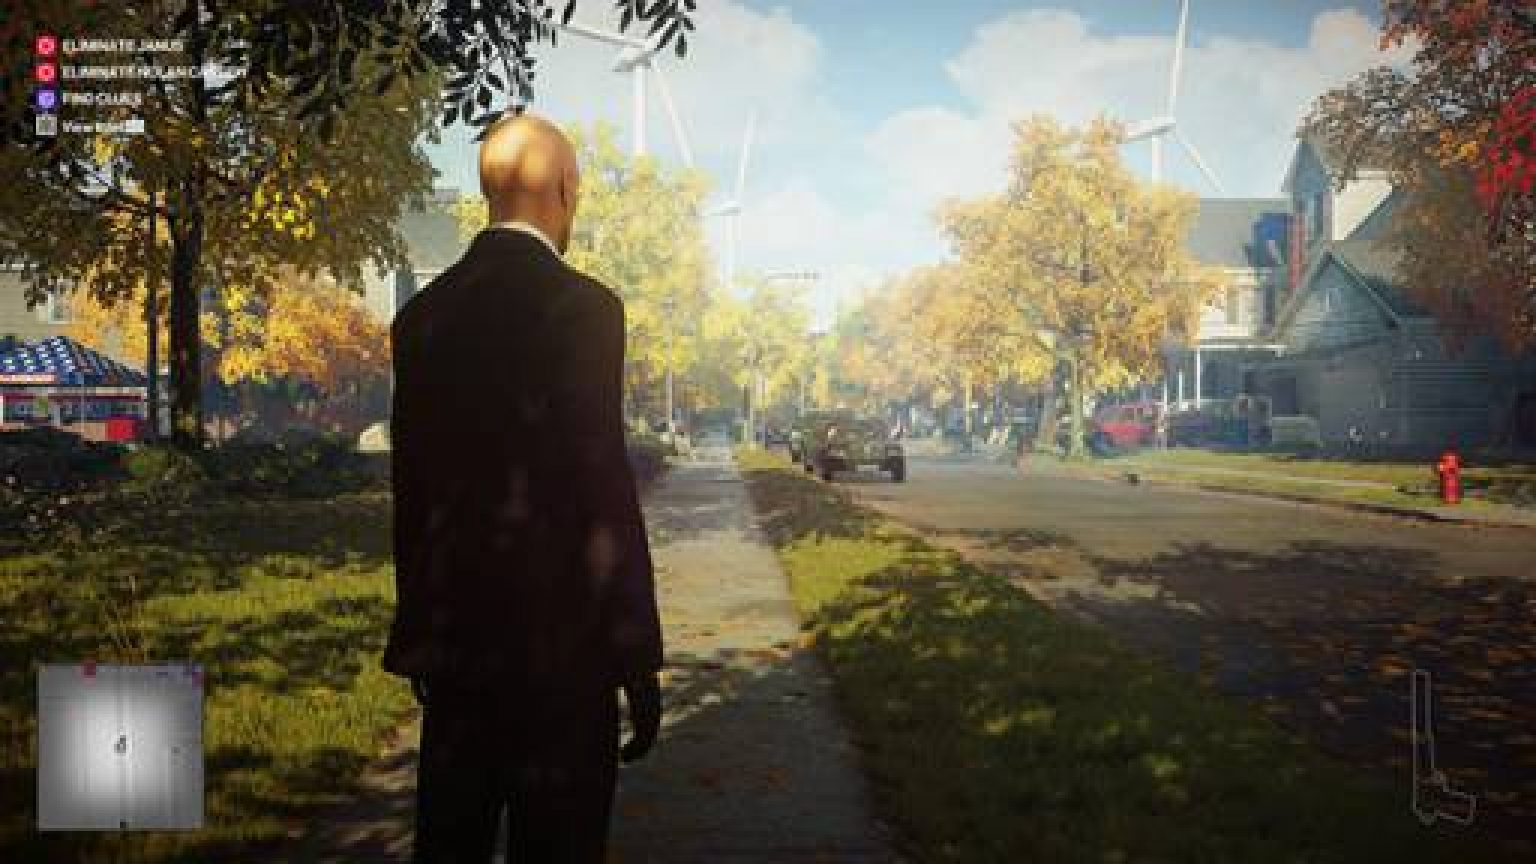 hitman absolution highly compressed